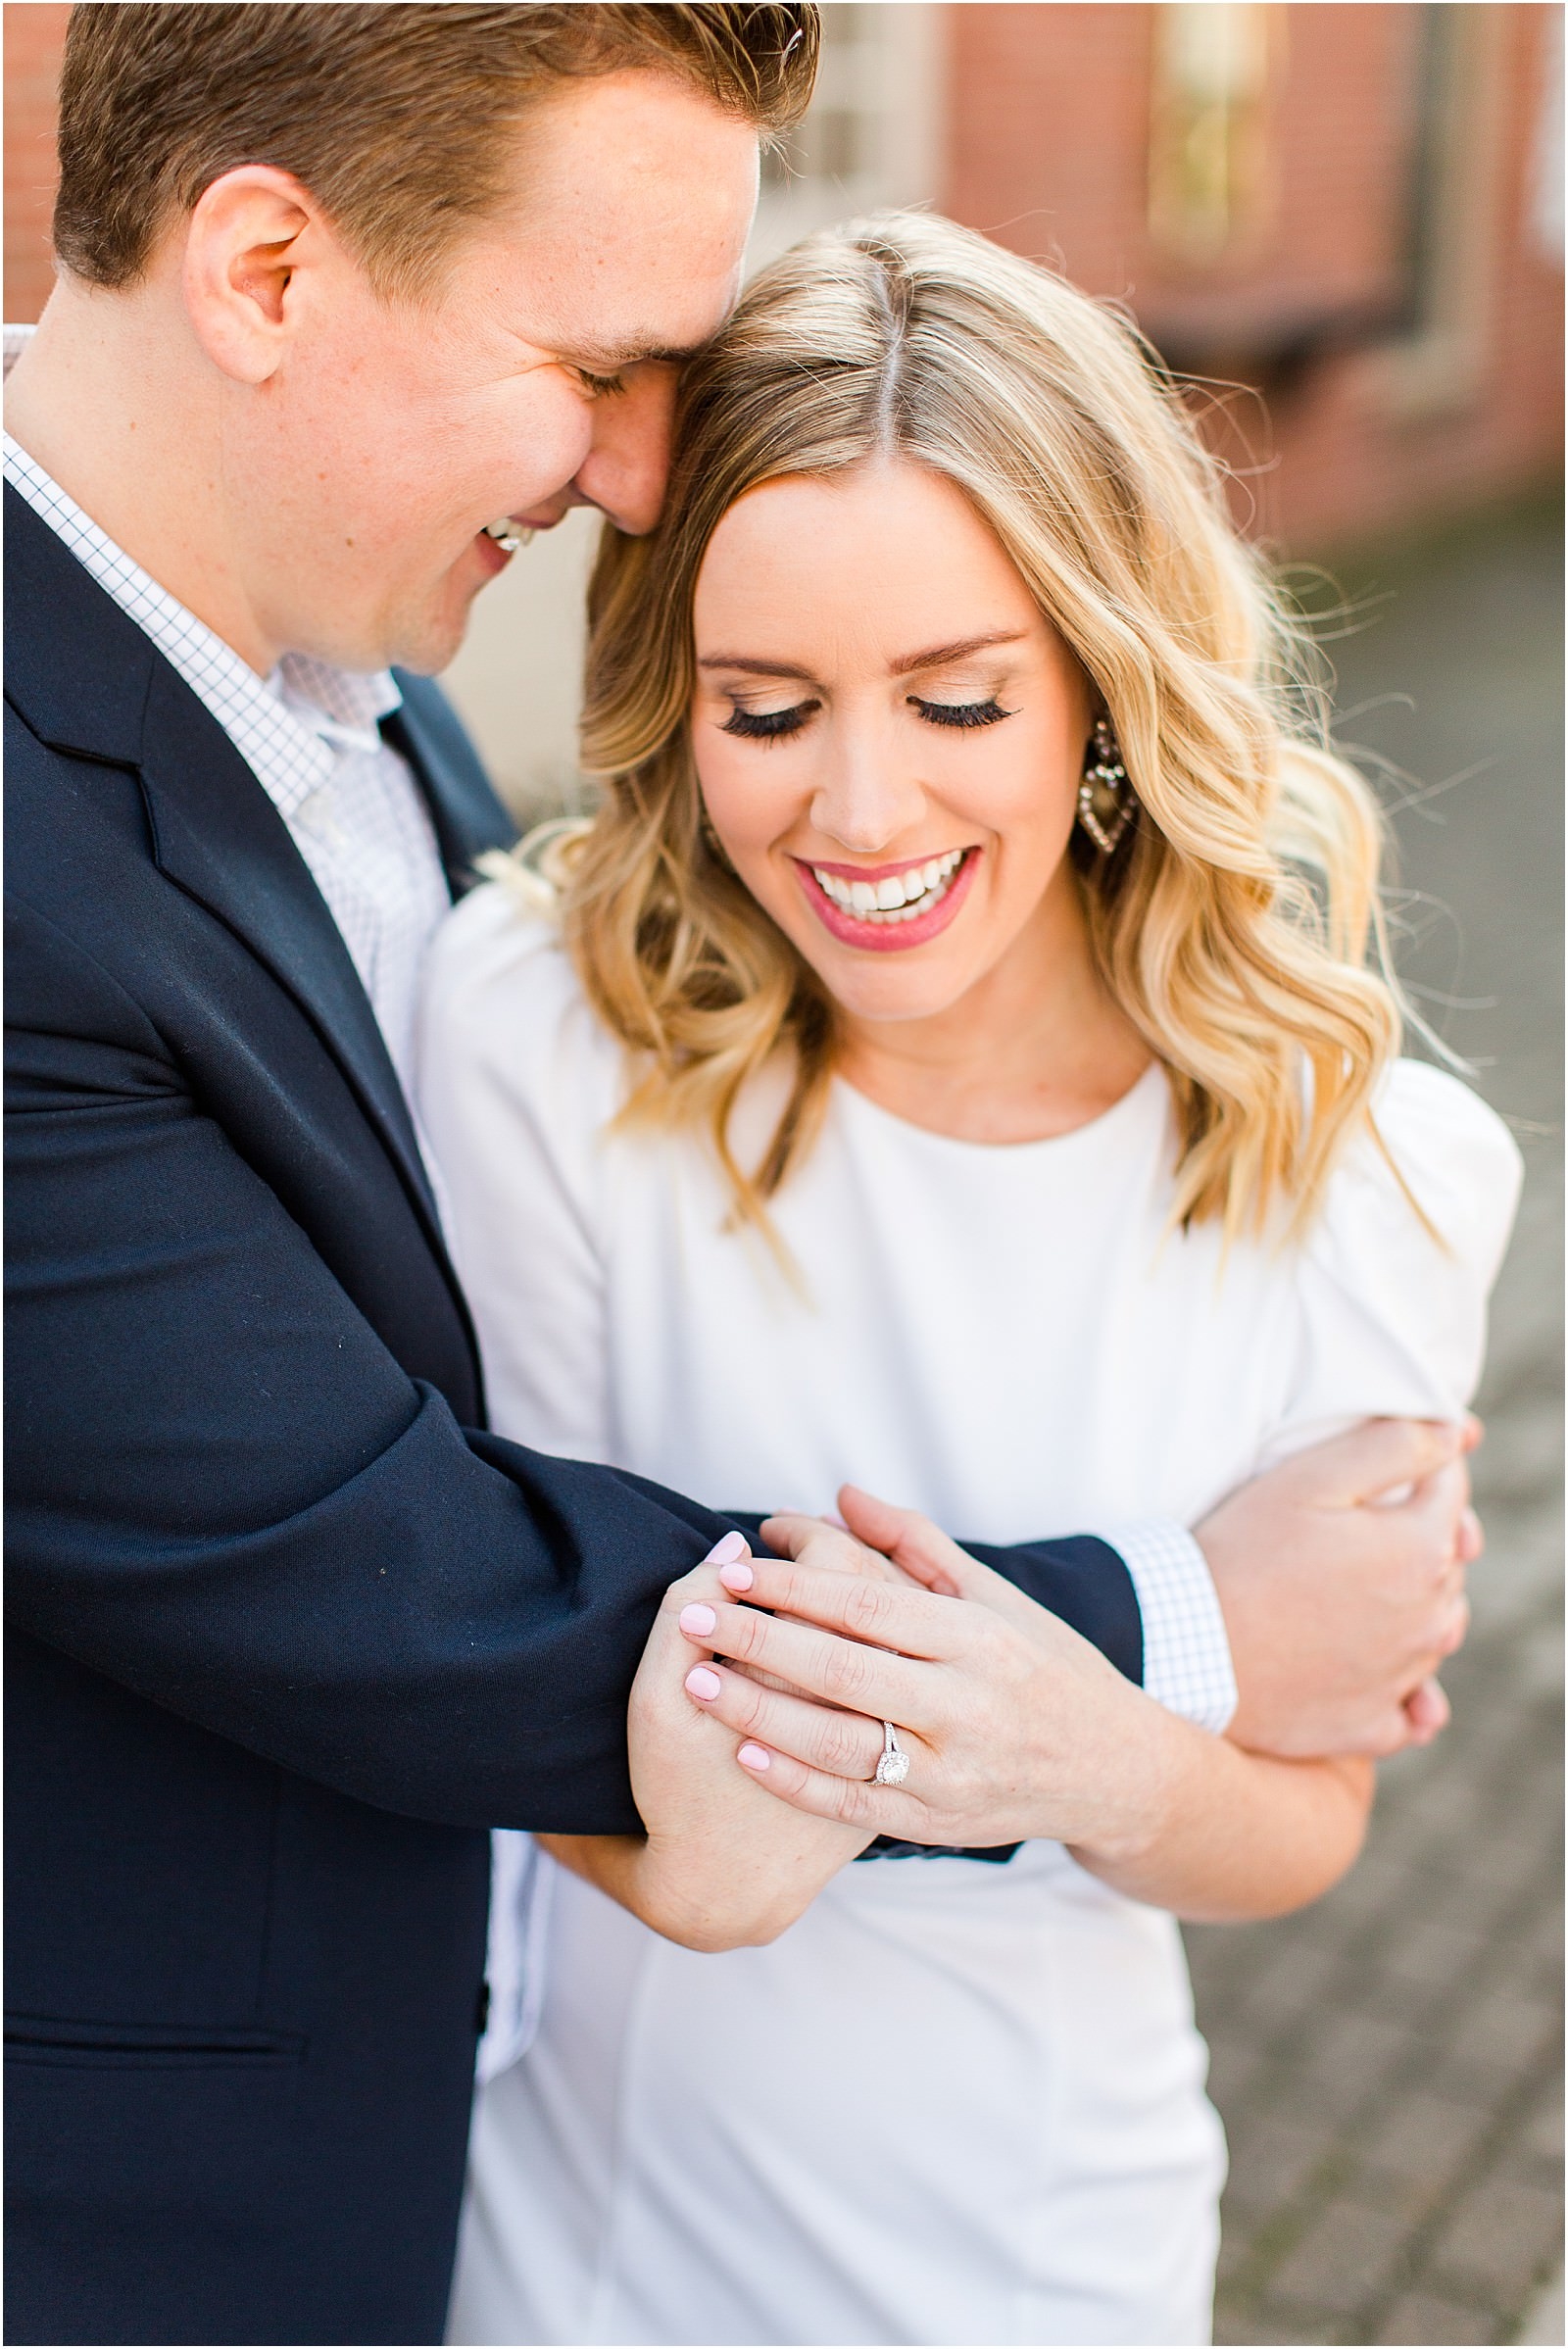 Madison and Christaan | A 20 West Engagement Session in Downto wn Newburgh | Bret and Brandie Photography008.jpg